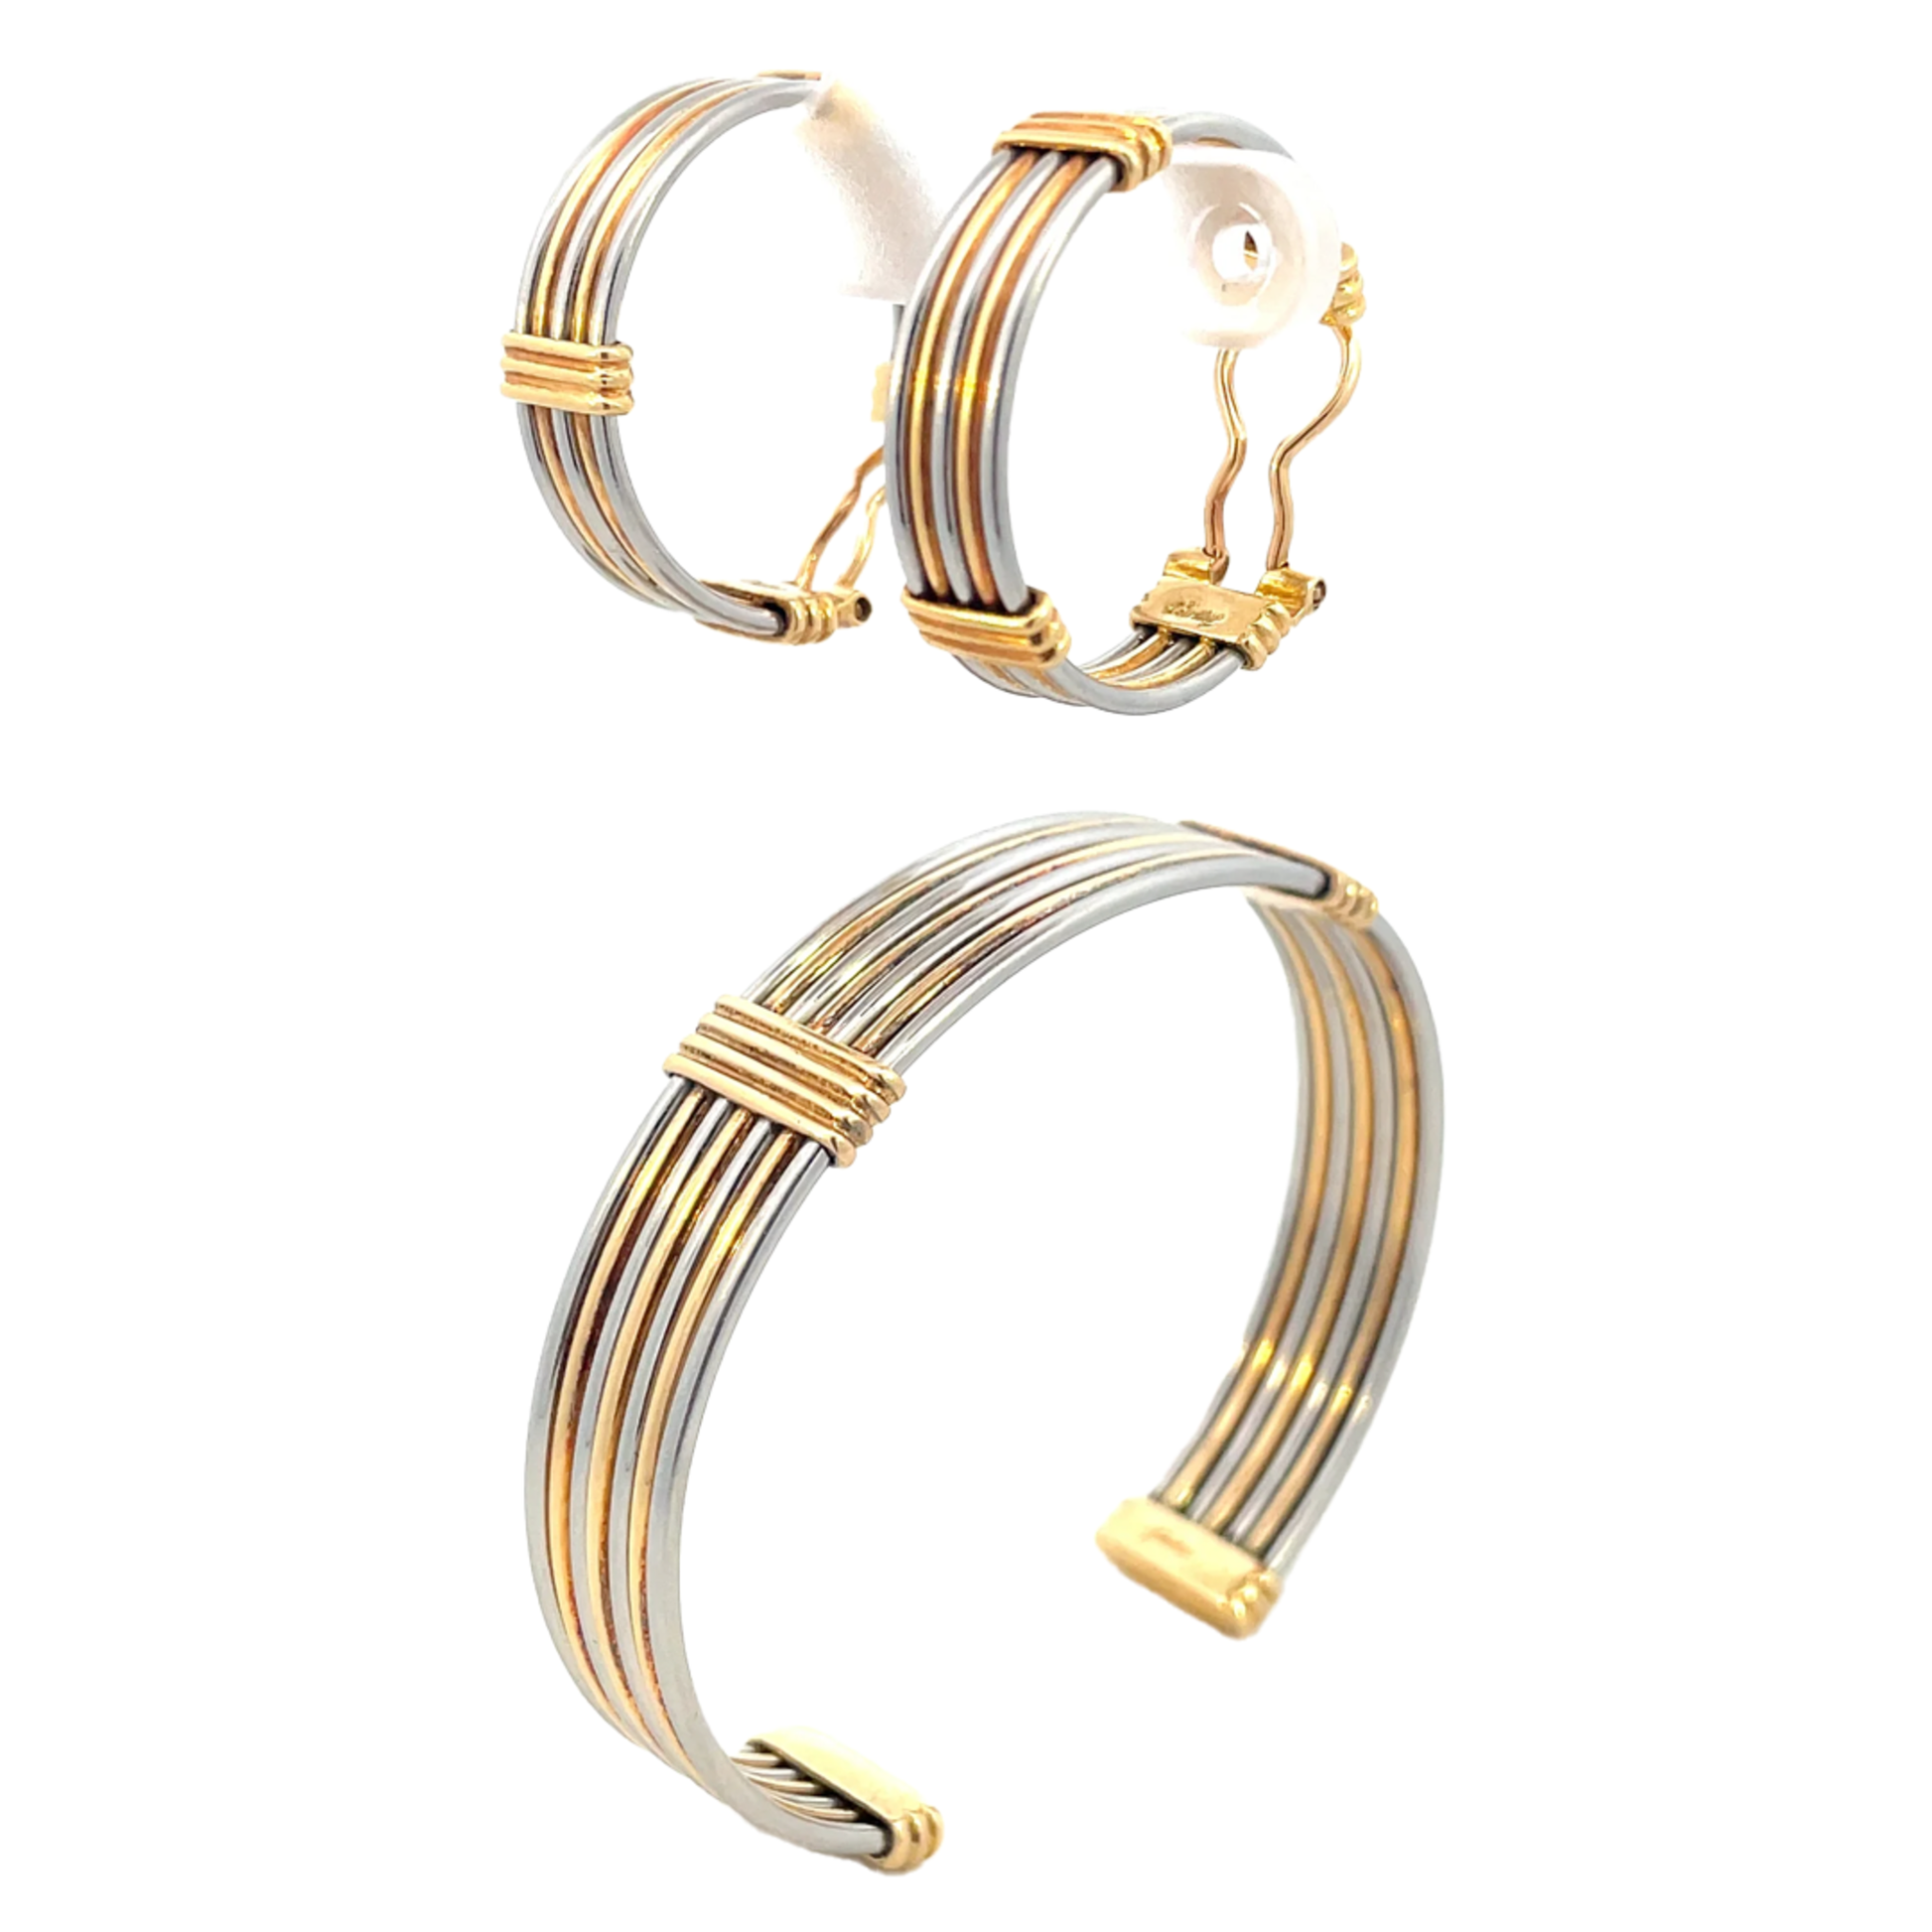 Cartier 1980s 18KT Yellow Gold Stainless Steel Earring & Bangle Bracelet Set front and side